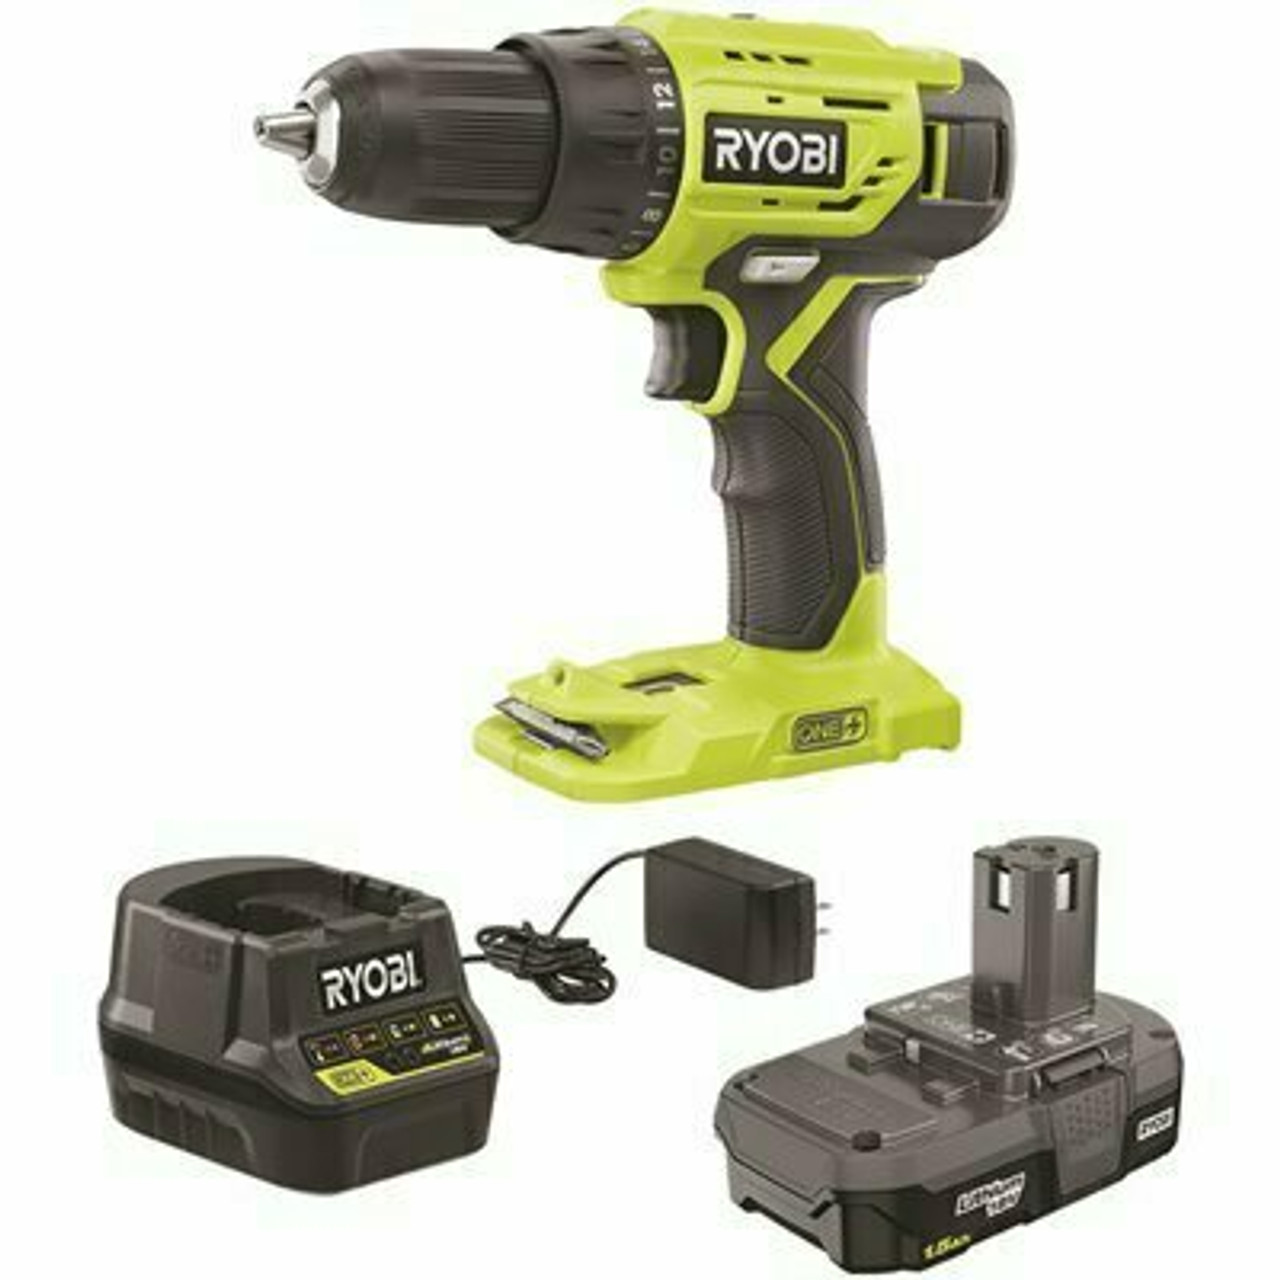 Ryobi One+ 18V Lithium-Ion Cordless 1/2 In. Drill/Driver Kit With (1) 1.5 Ah Battery And 18V Charger